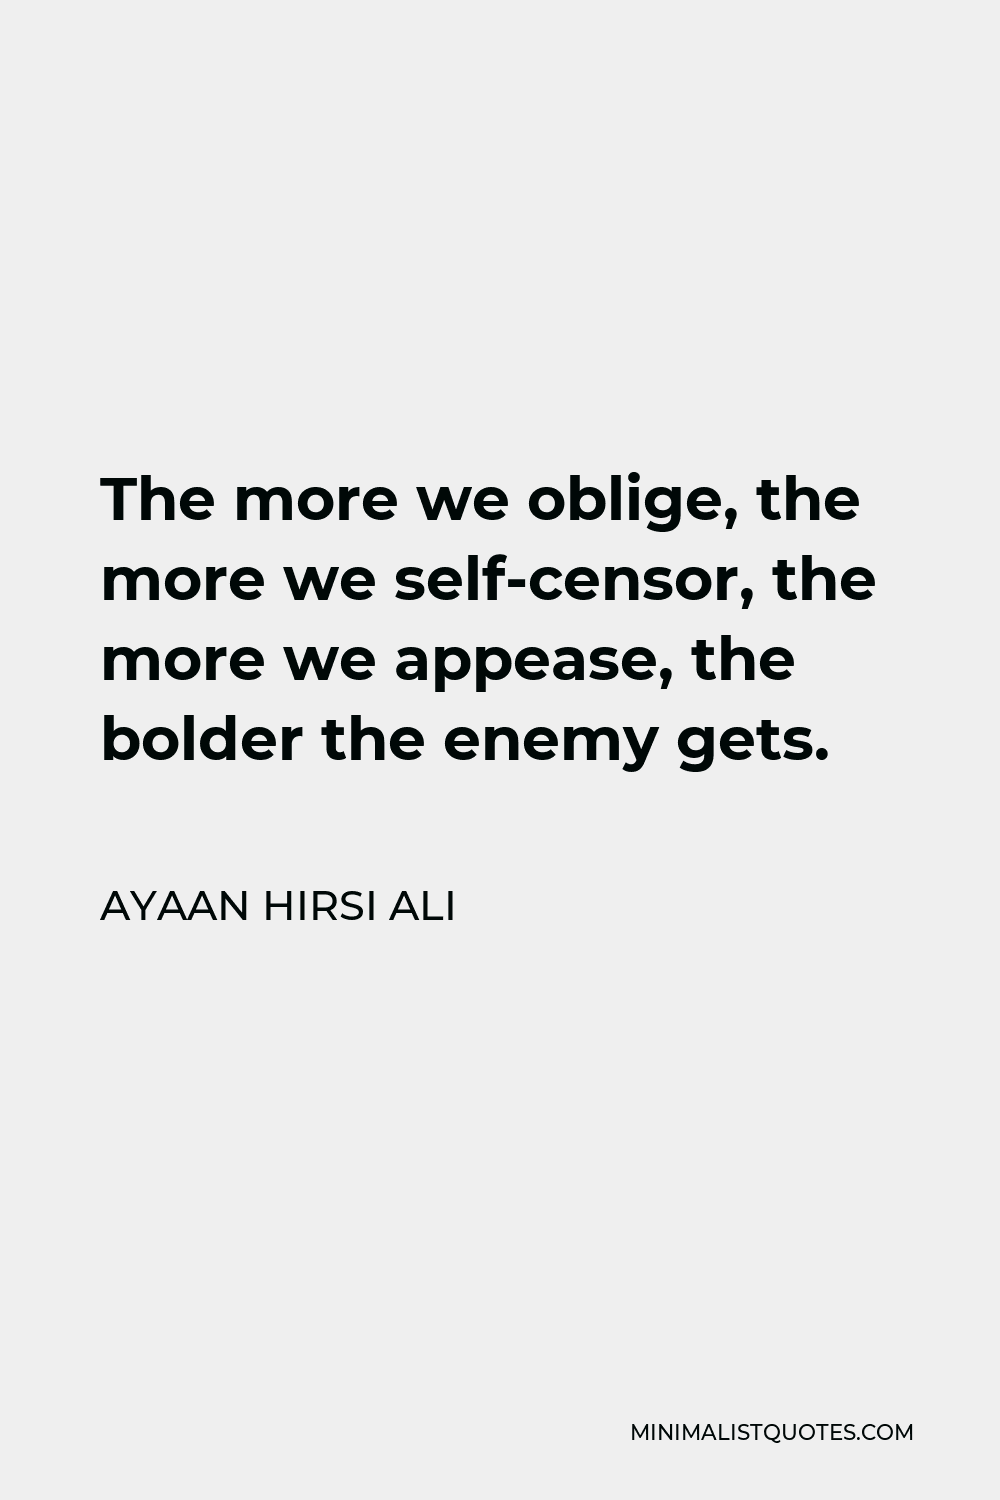 Ayaan Hirsi Ali Quote - The more we oblige, the more we self-censor, the more we appease, the bolder the enemy gets.